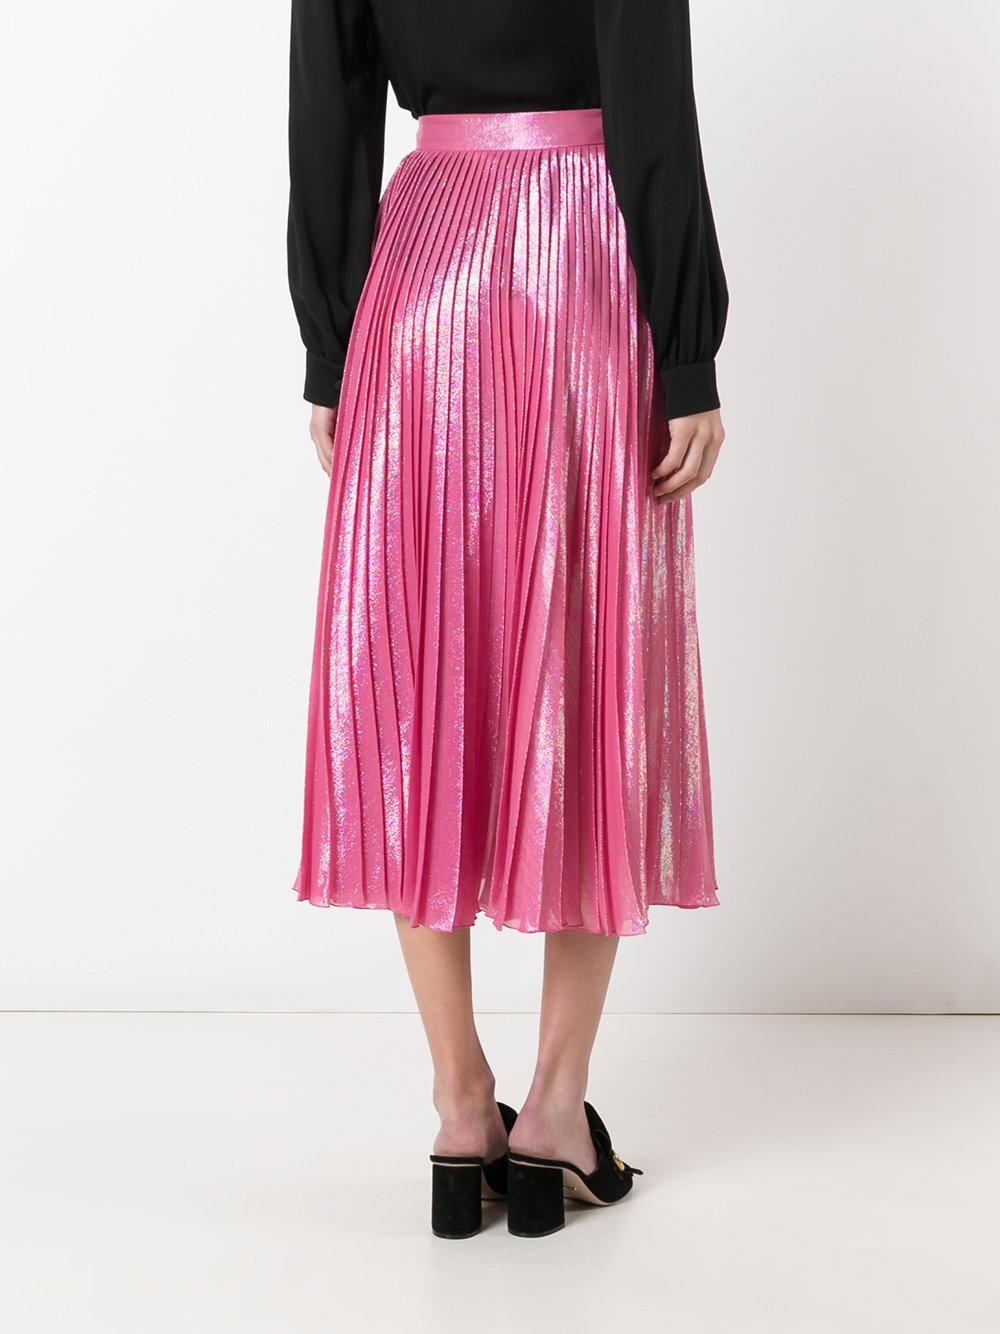 Gucci Pleated Metallic Skirt in Pink | Lyst